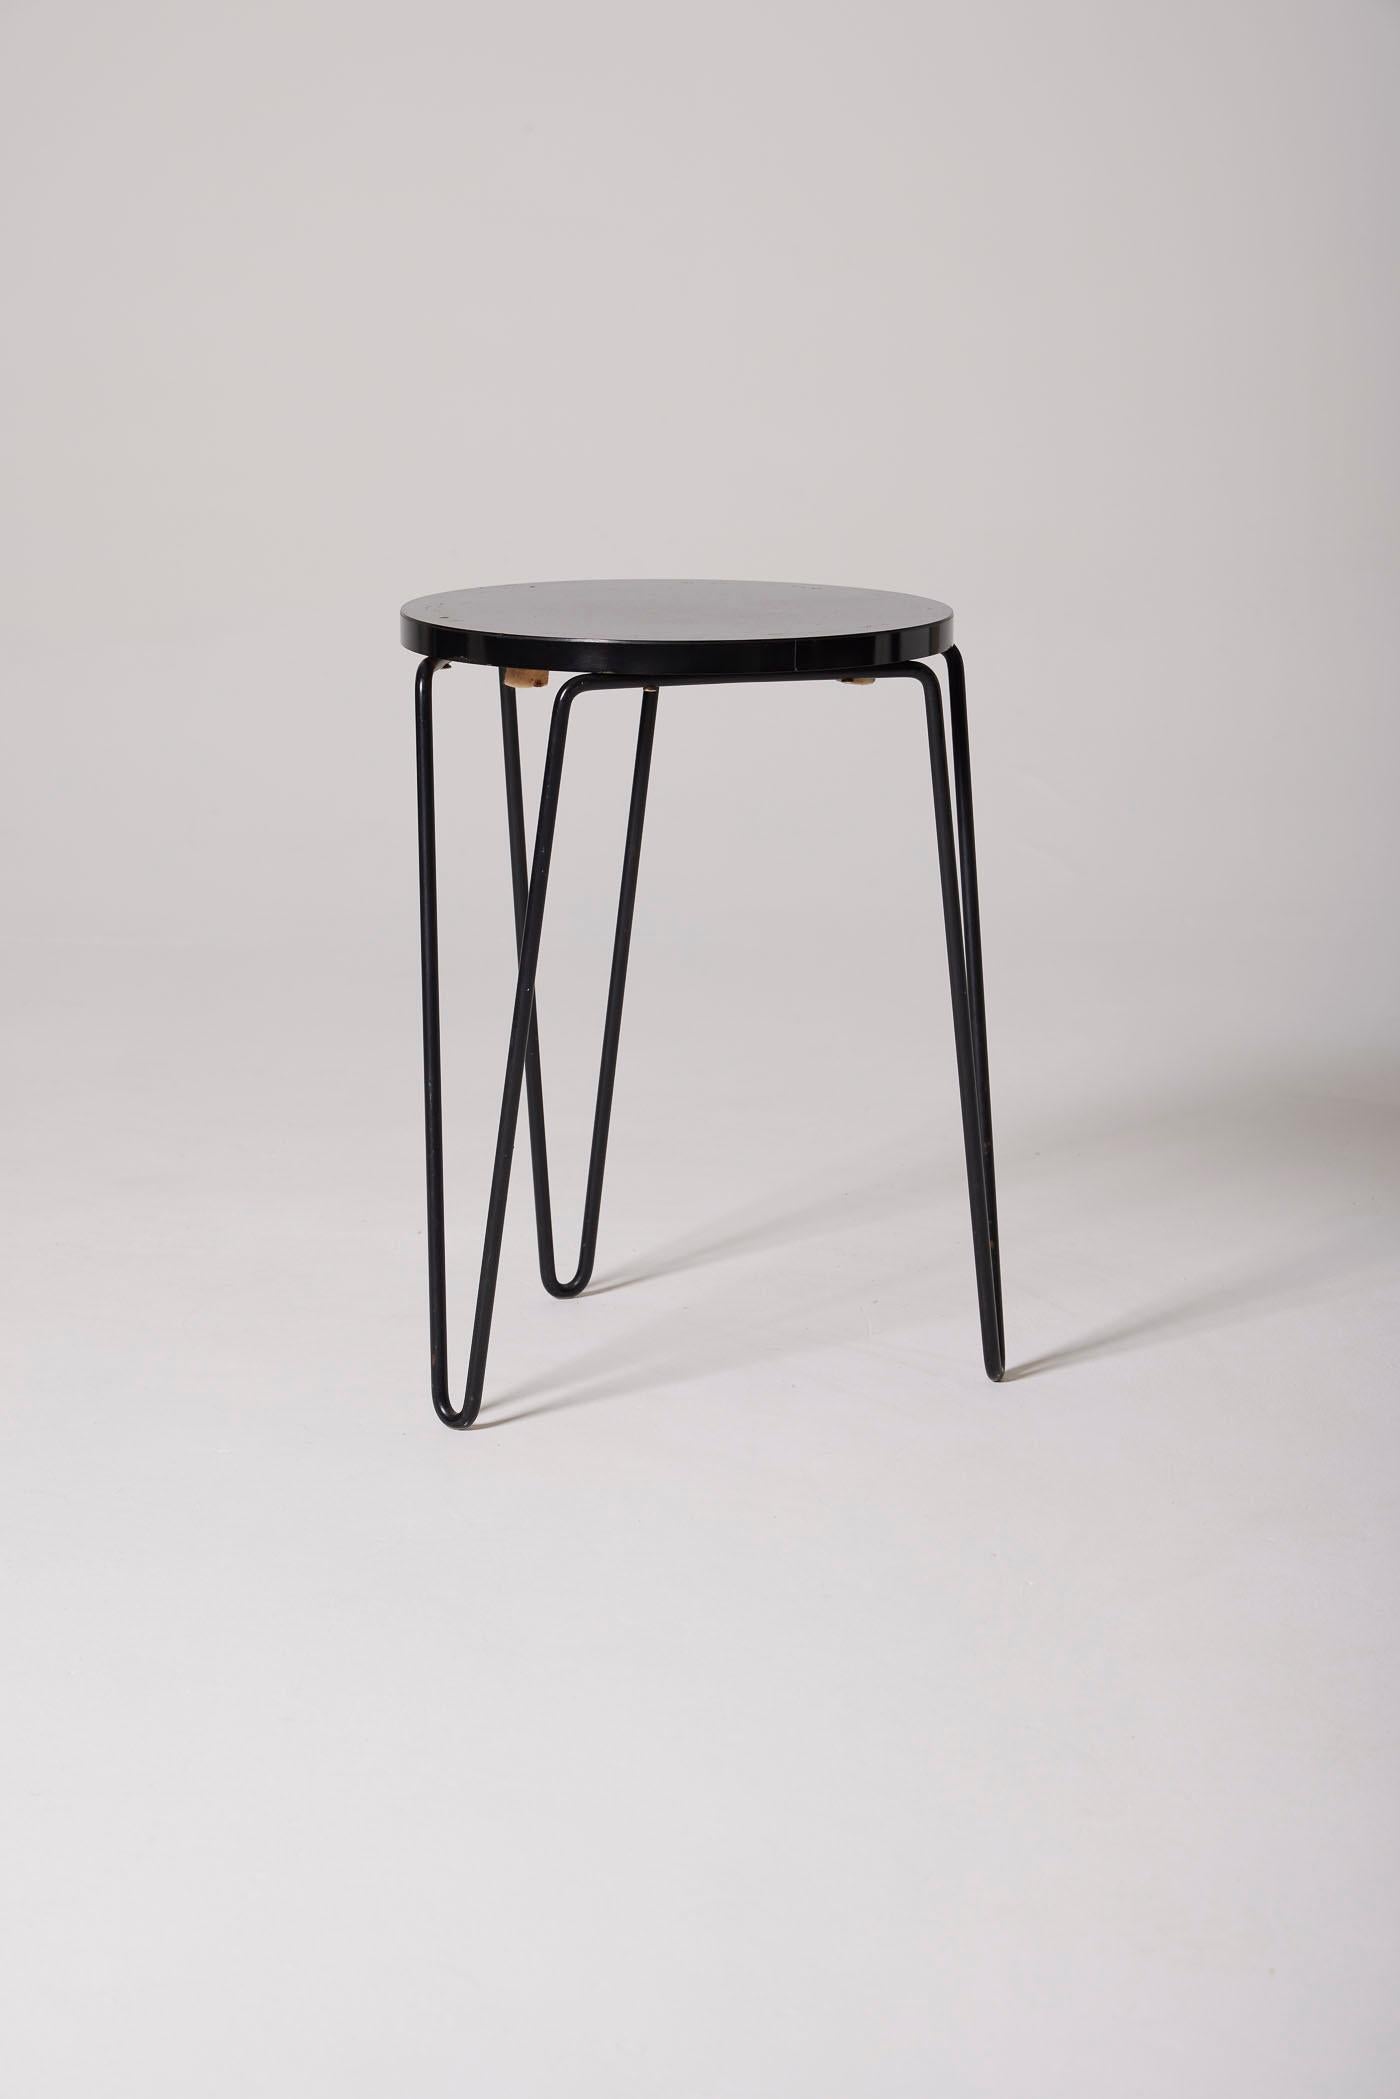 Stool model 75 by designer Florence Knoll for Knoll International, 1950s. Black Formica seat resting on a black lacquered tubular base. In perfect condition.
DV505-506